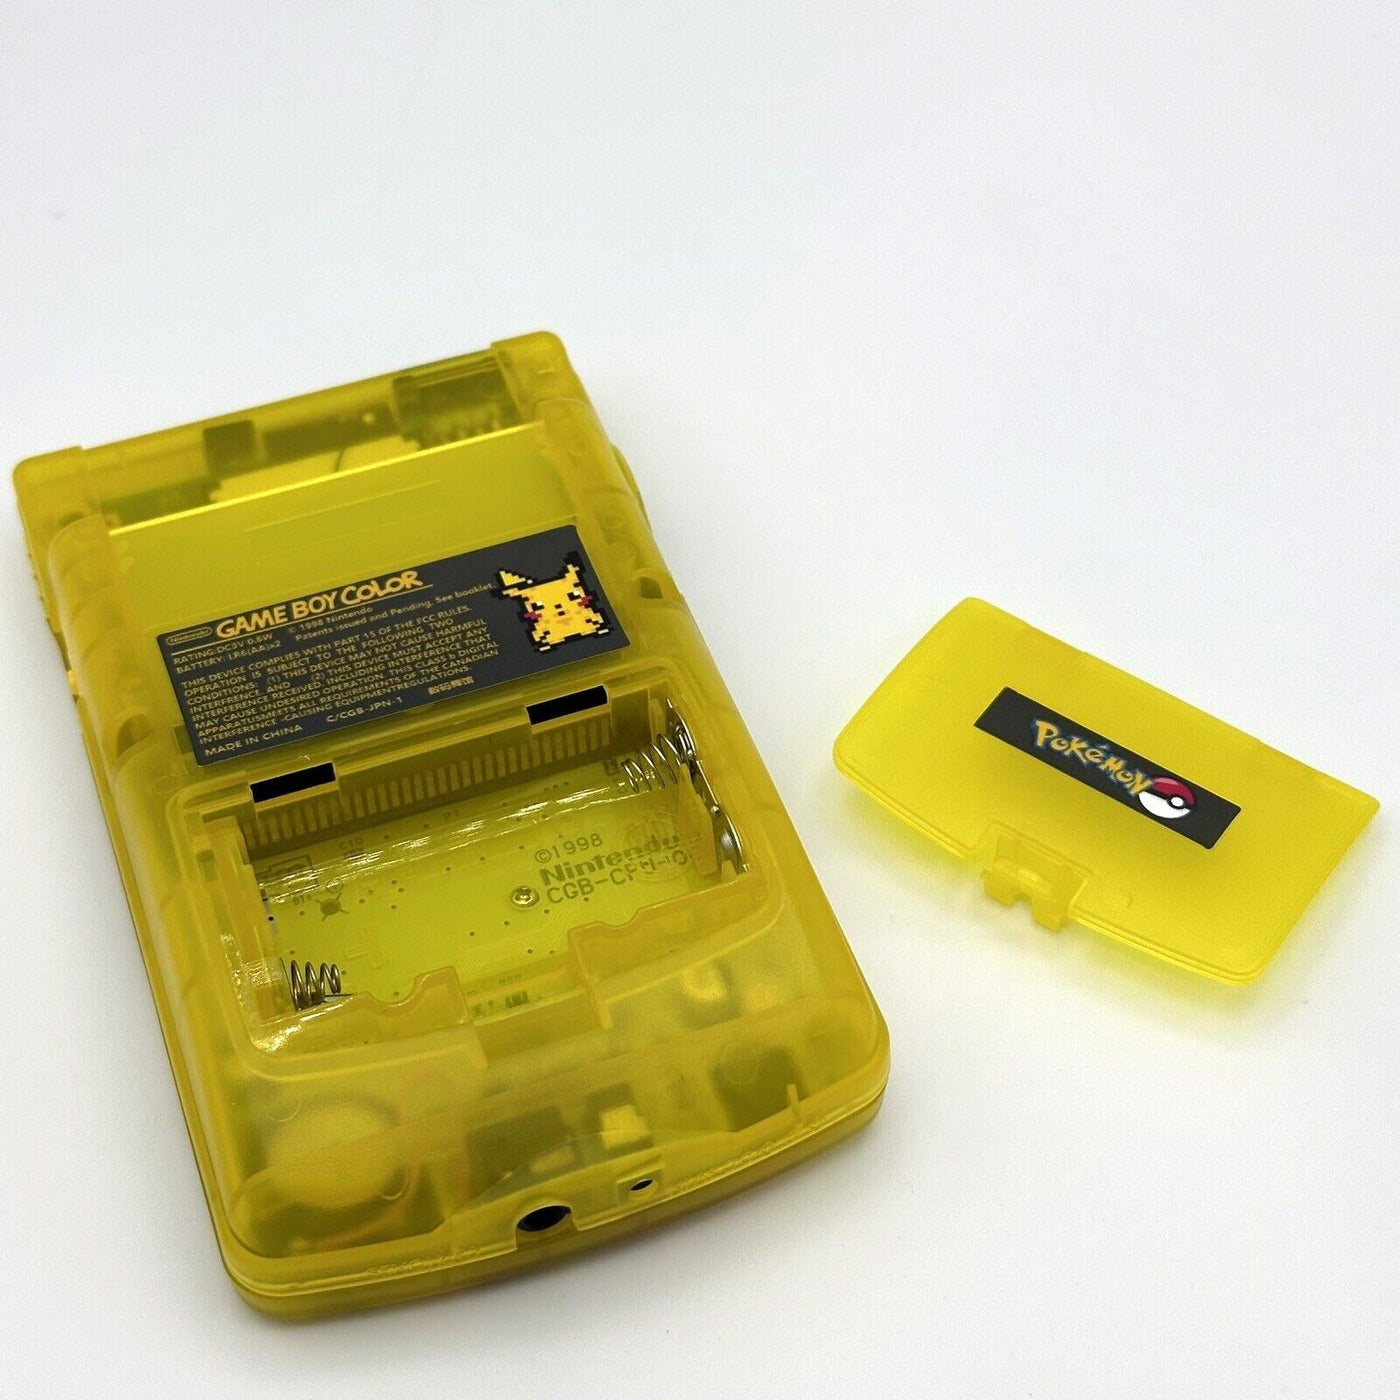 Game Boy Color IPS V2 Console - Pikachu Yellow Edition